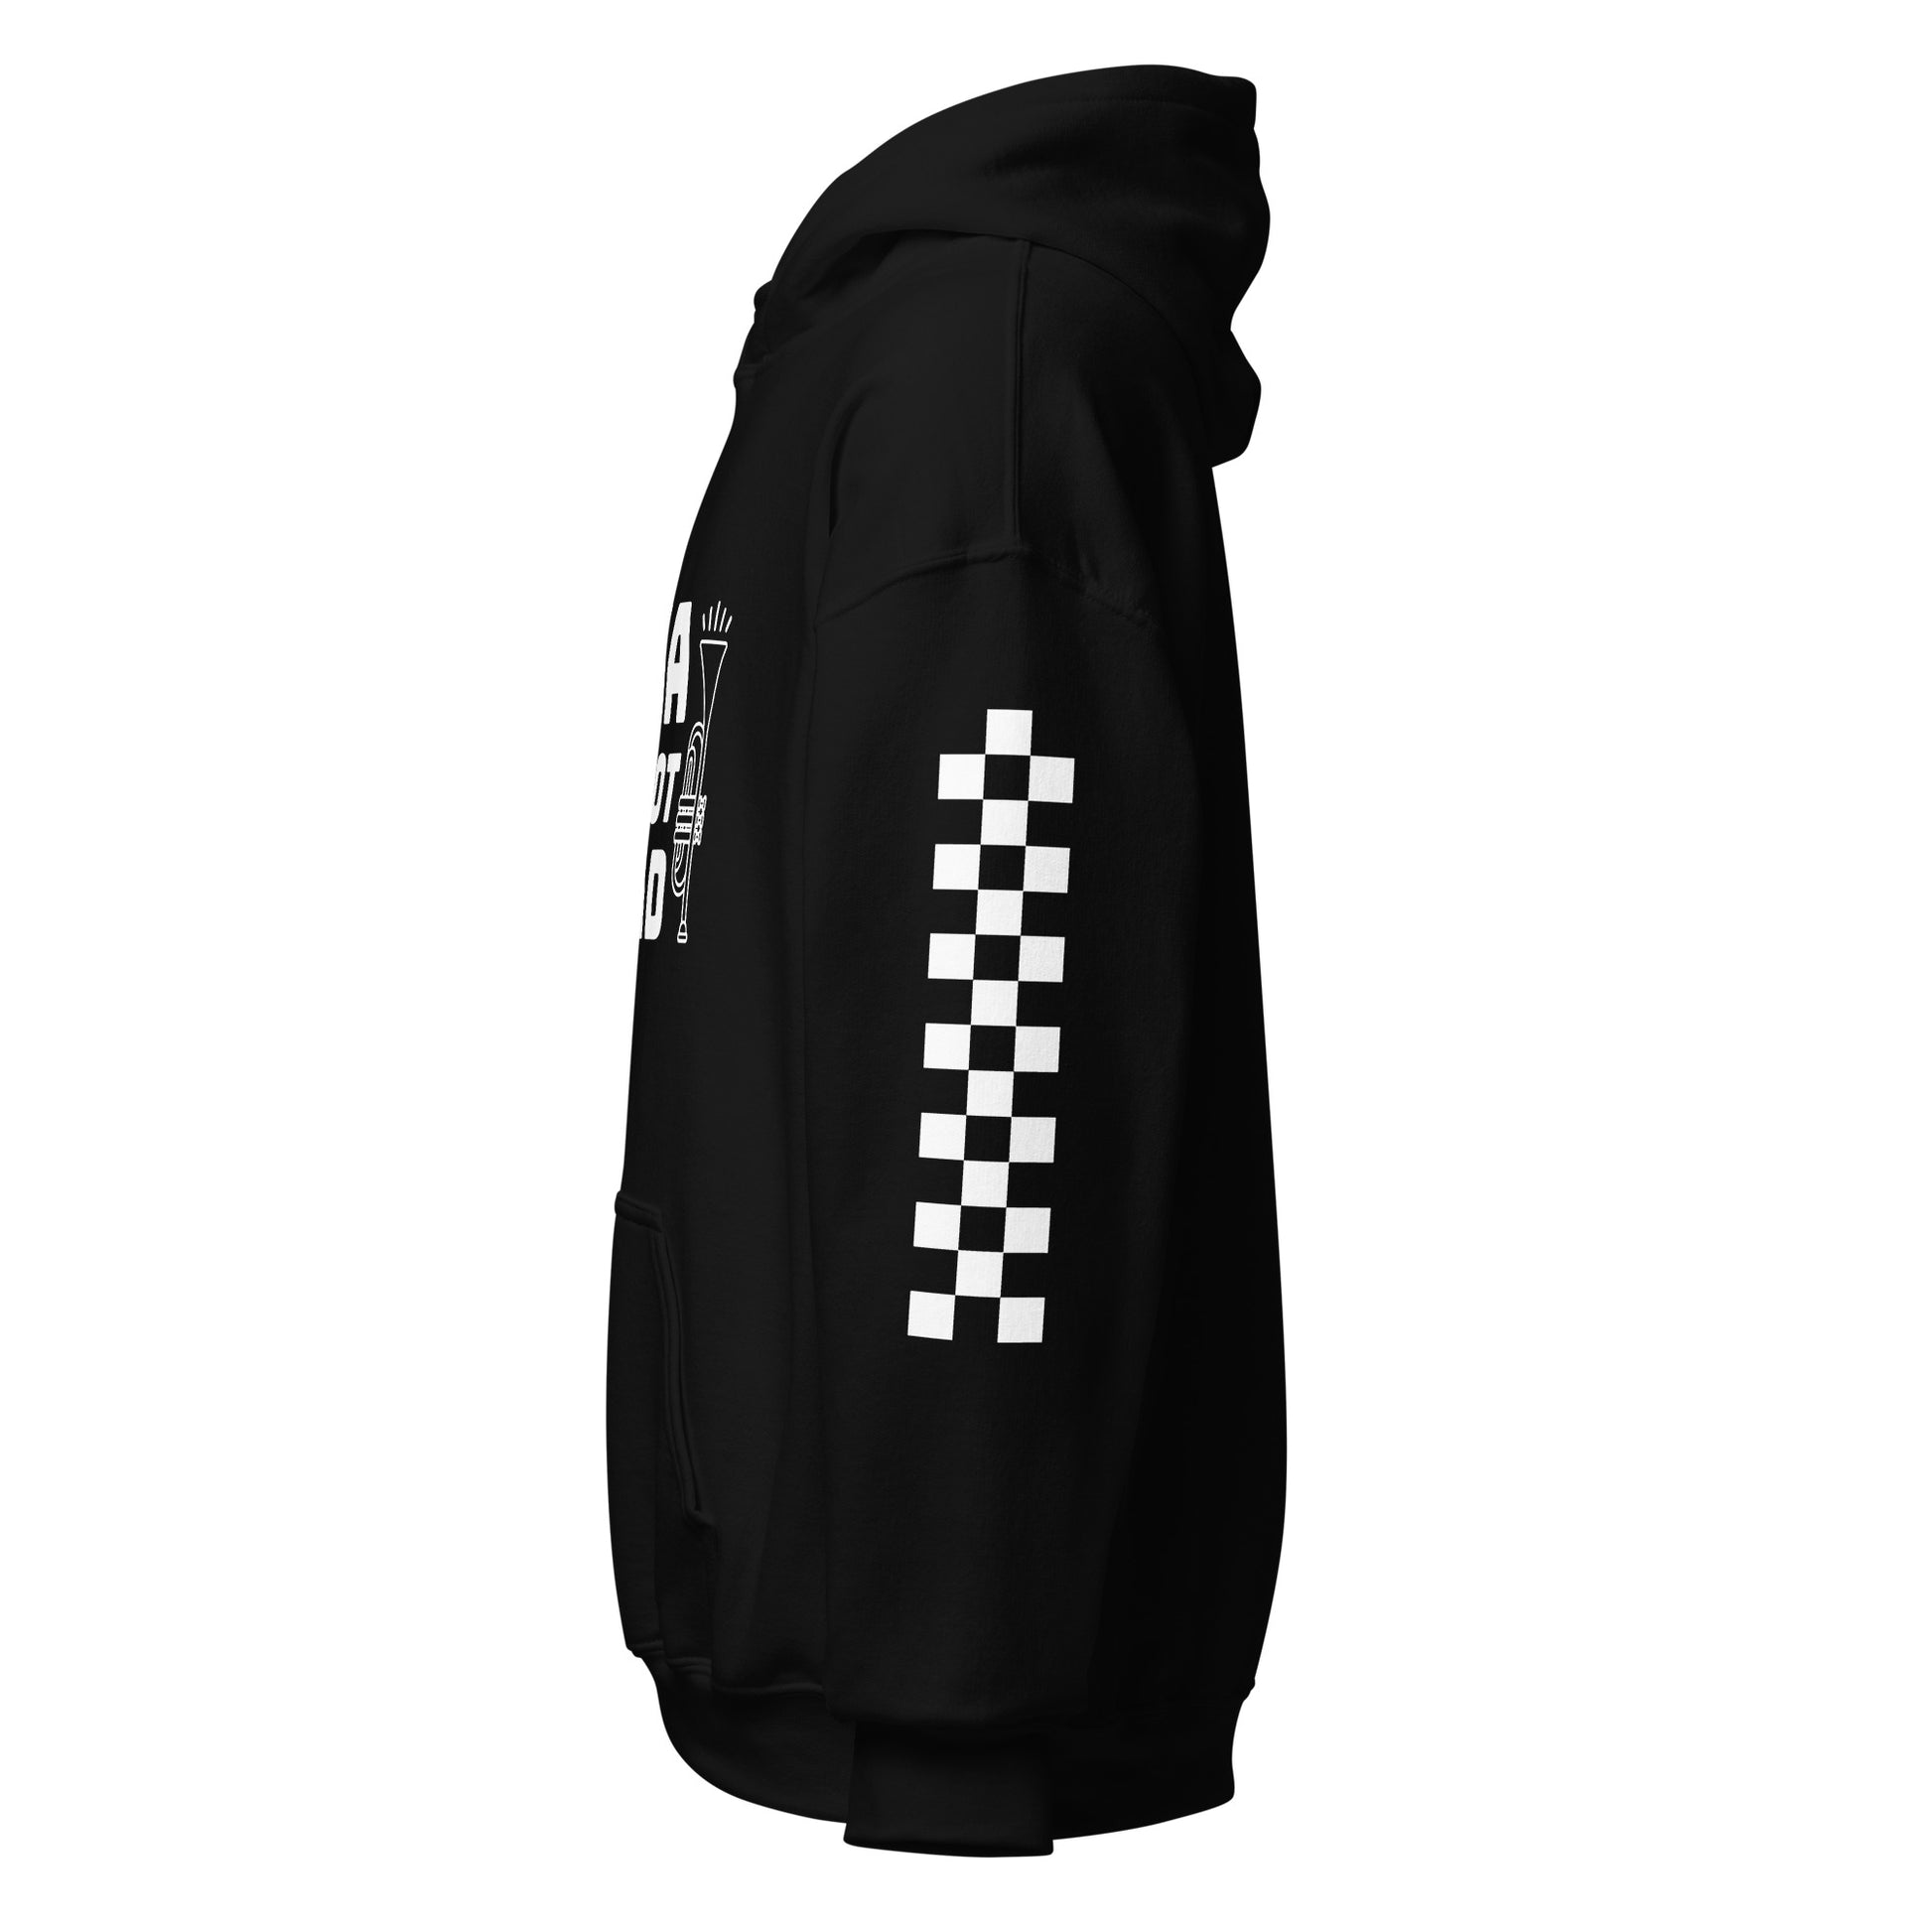 A black hooded sweatshirt facing the left. The sleeve features a panel of black and white checkered pattern.